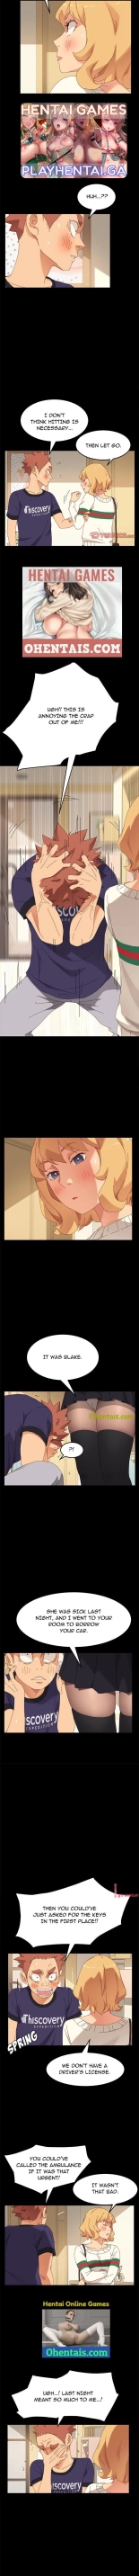 The Perfect Roommates Ch. 10-11 : page 23